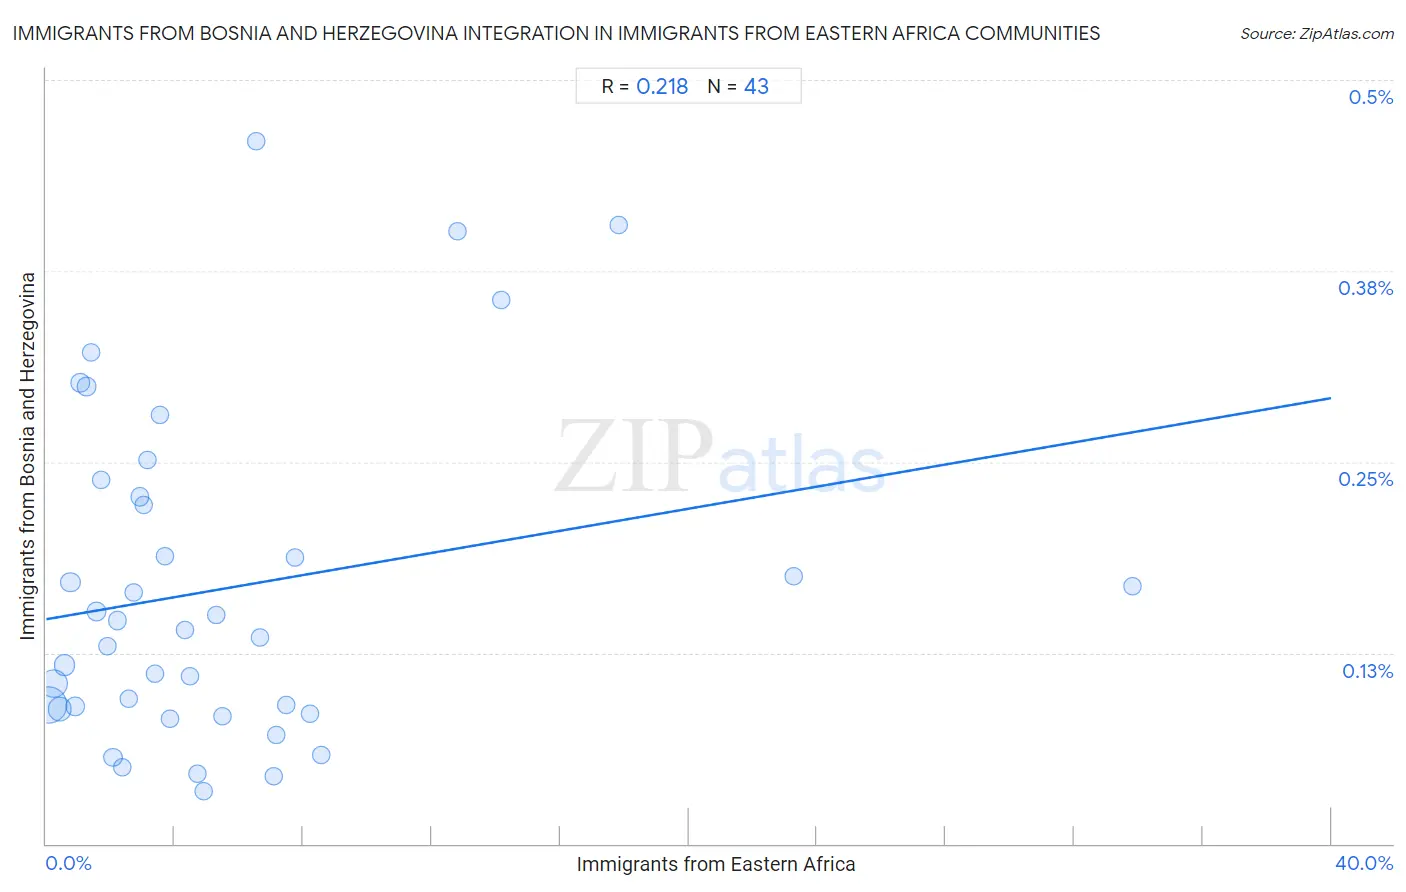 Immigrants from Eastern Africa Integration in Immigrants from Bosnia and Herzegovina Communities